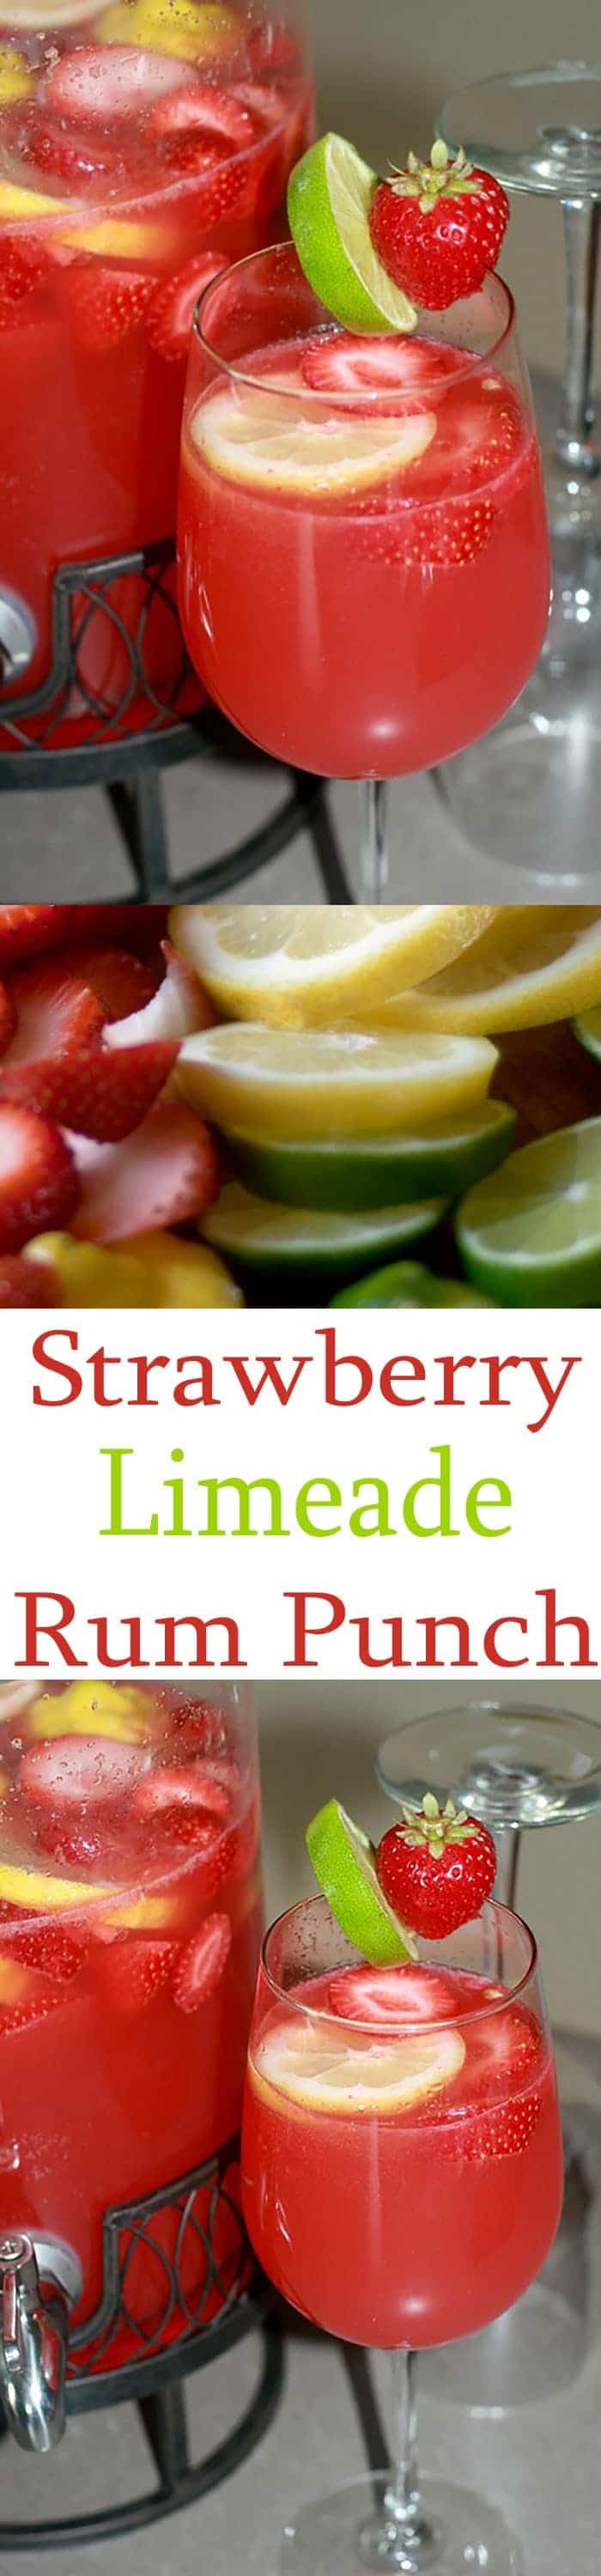 Strawberry Limeade Rum Punch is a delicious party punch recipe perfect for summer cocktails by the pitcher if you want to serve alcoholic party punch recipes.